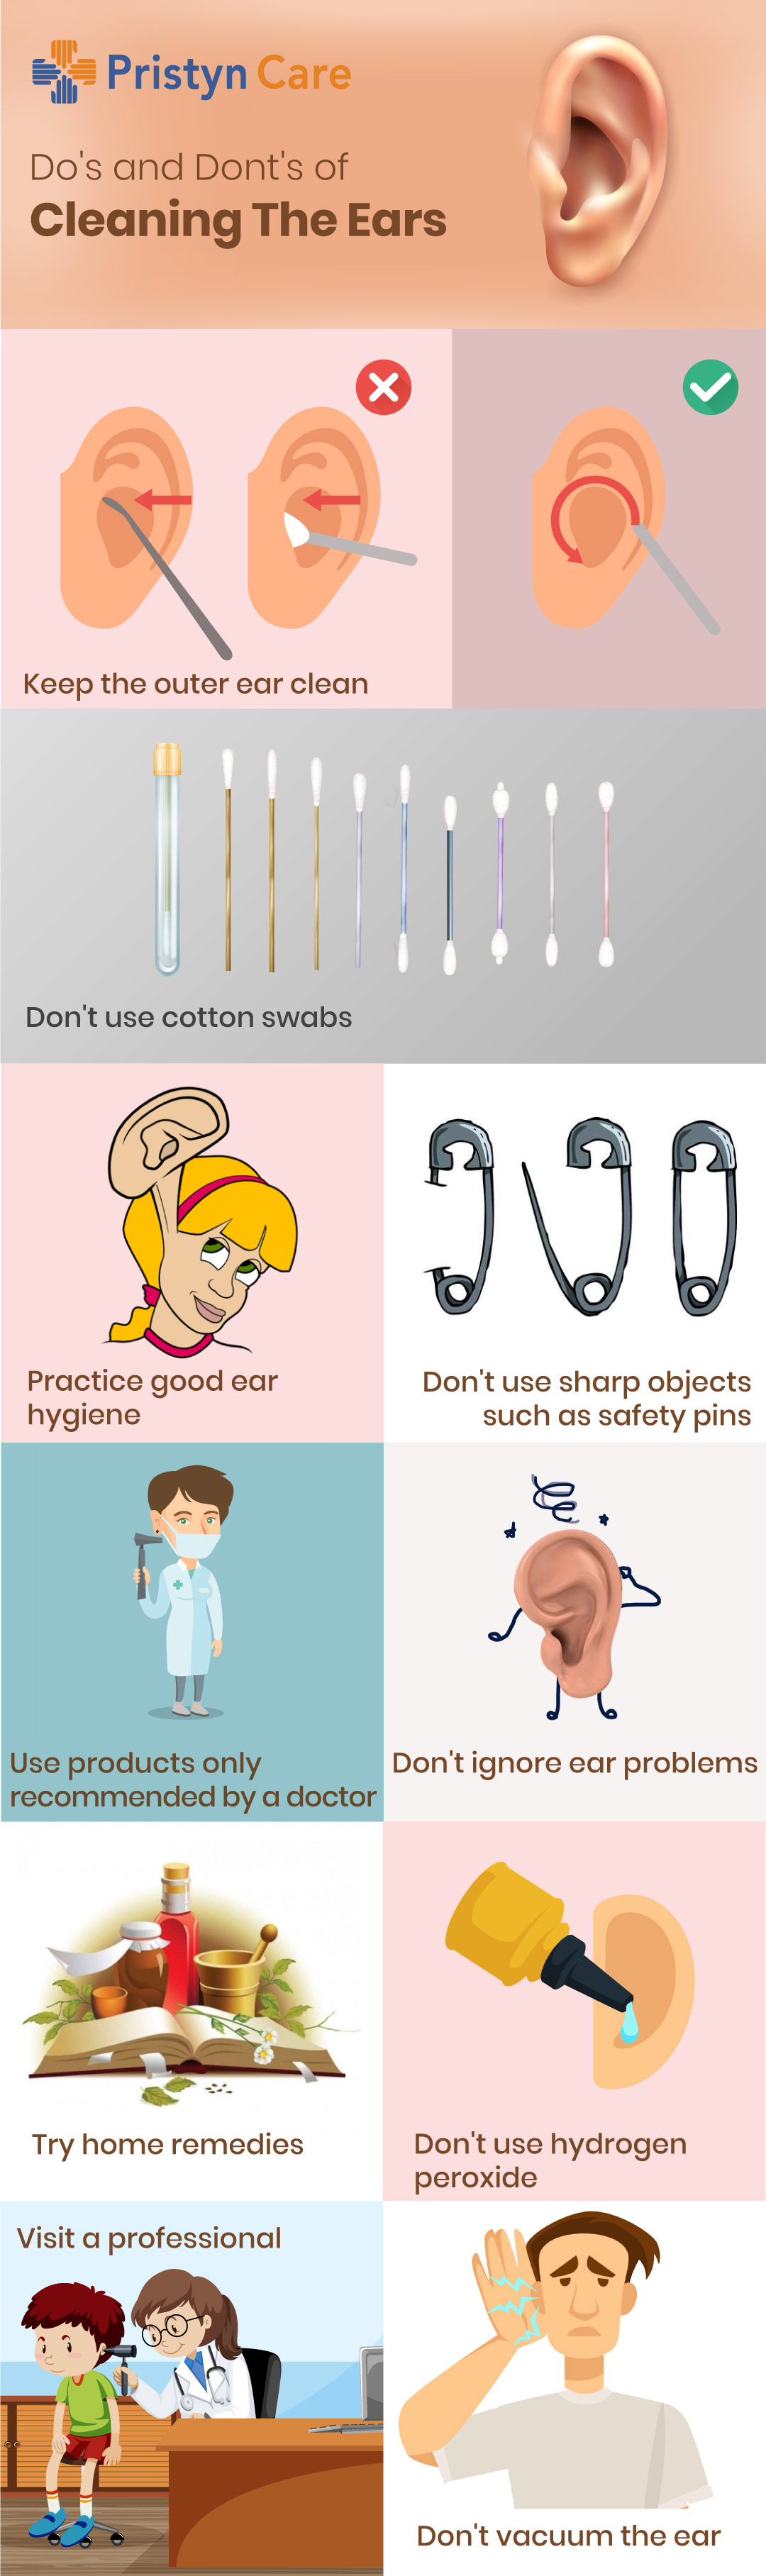 How to Safely Clean Your Ears (and What to Absolutely Not Do) - CNET